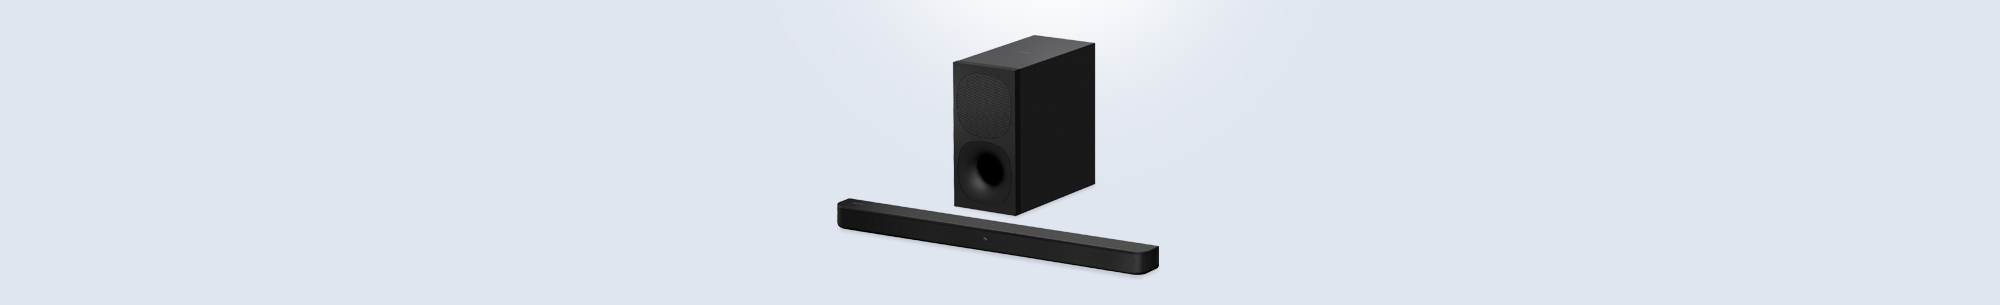 Sound bar with wireless subwoofer